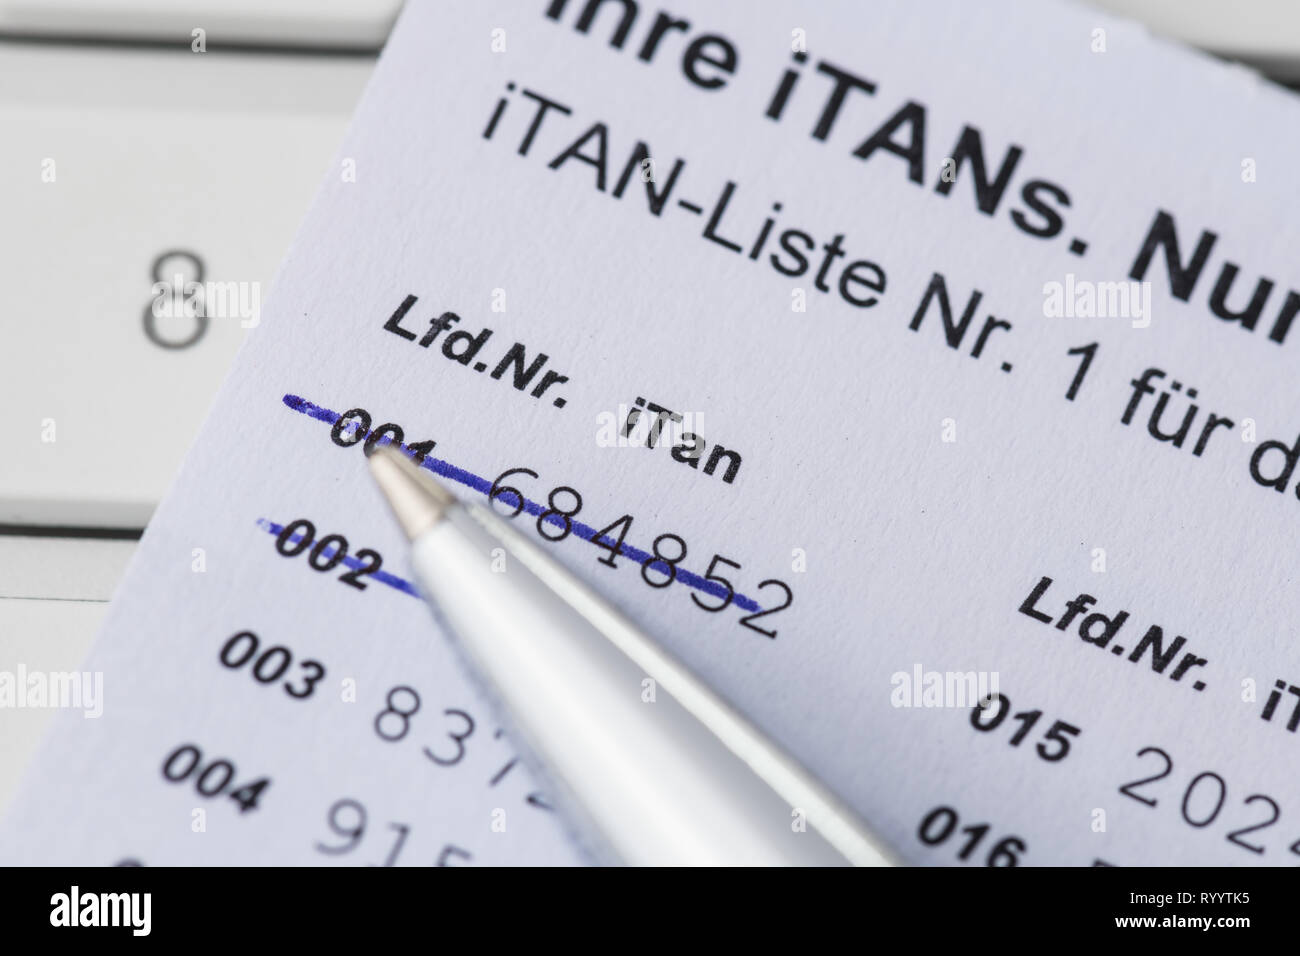 iTan-list with pen and computer keyboard Stock Photo